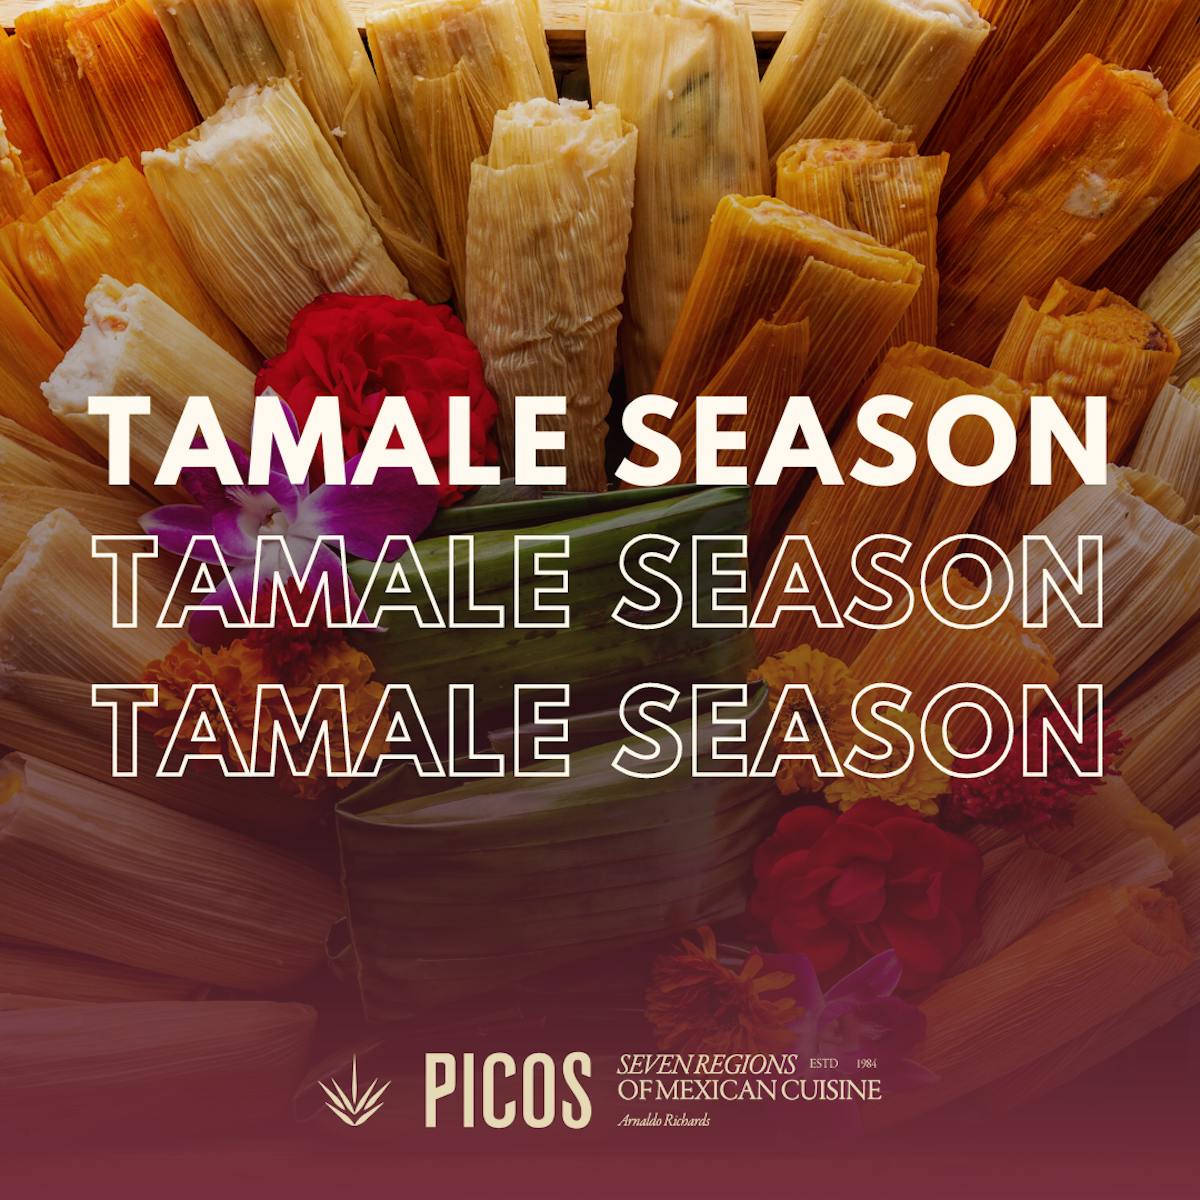 a promotional image for the Holiday Tamale Stand at Arnaldo Richards' Picos Restaurant in Houston, Texas